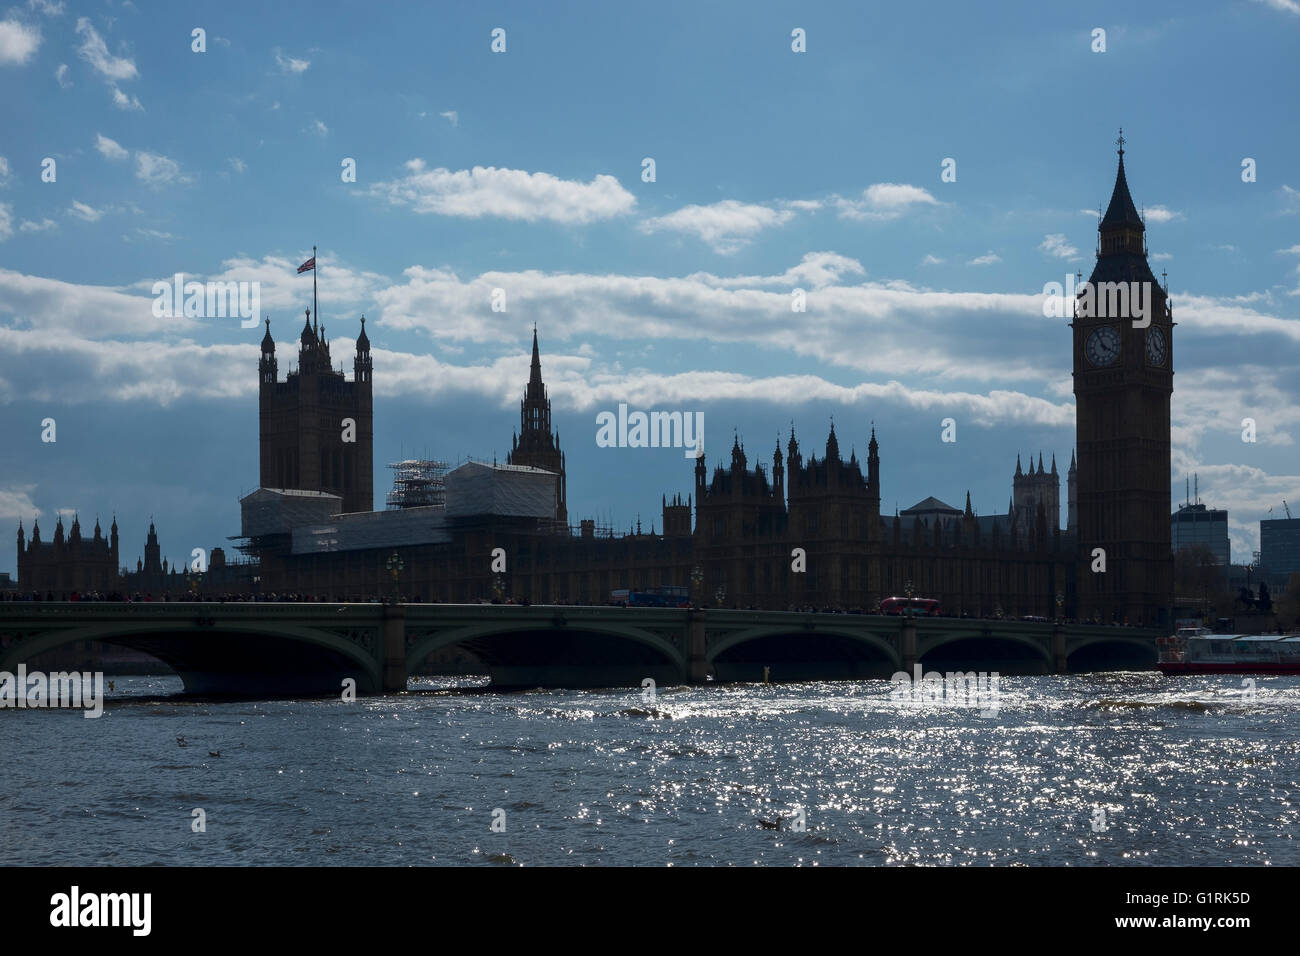 Big Ben and the Houses of Parliament in silhouette Stock Photo